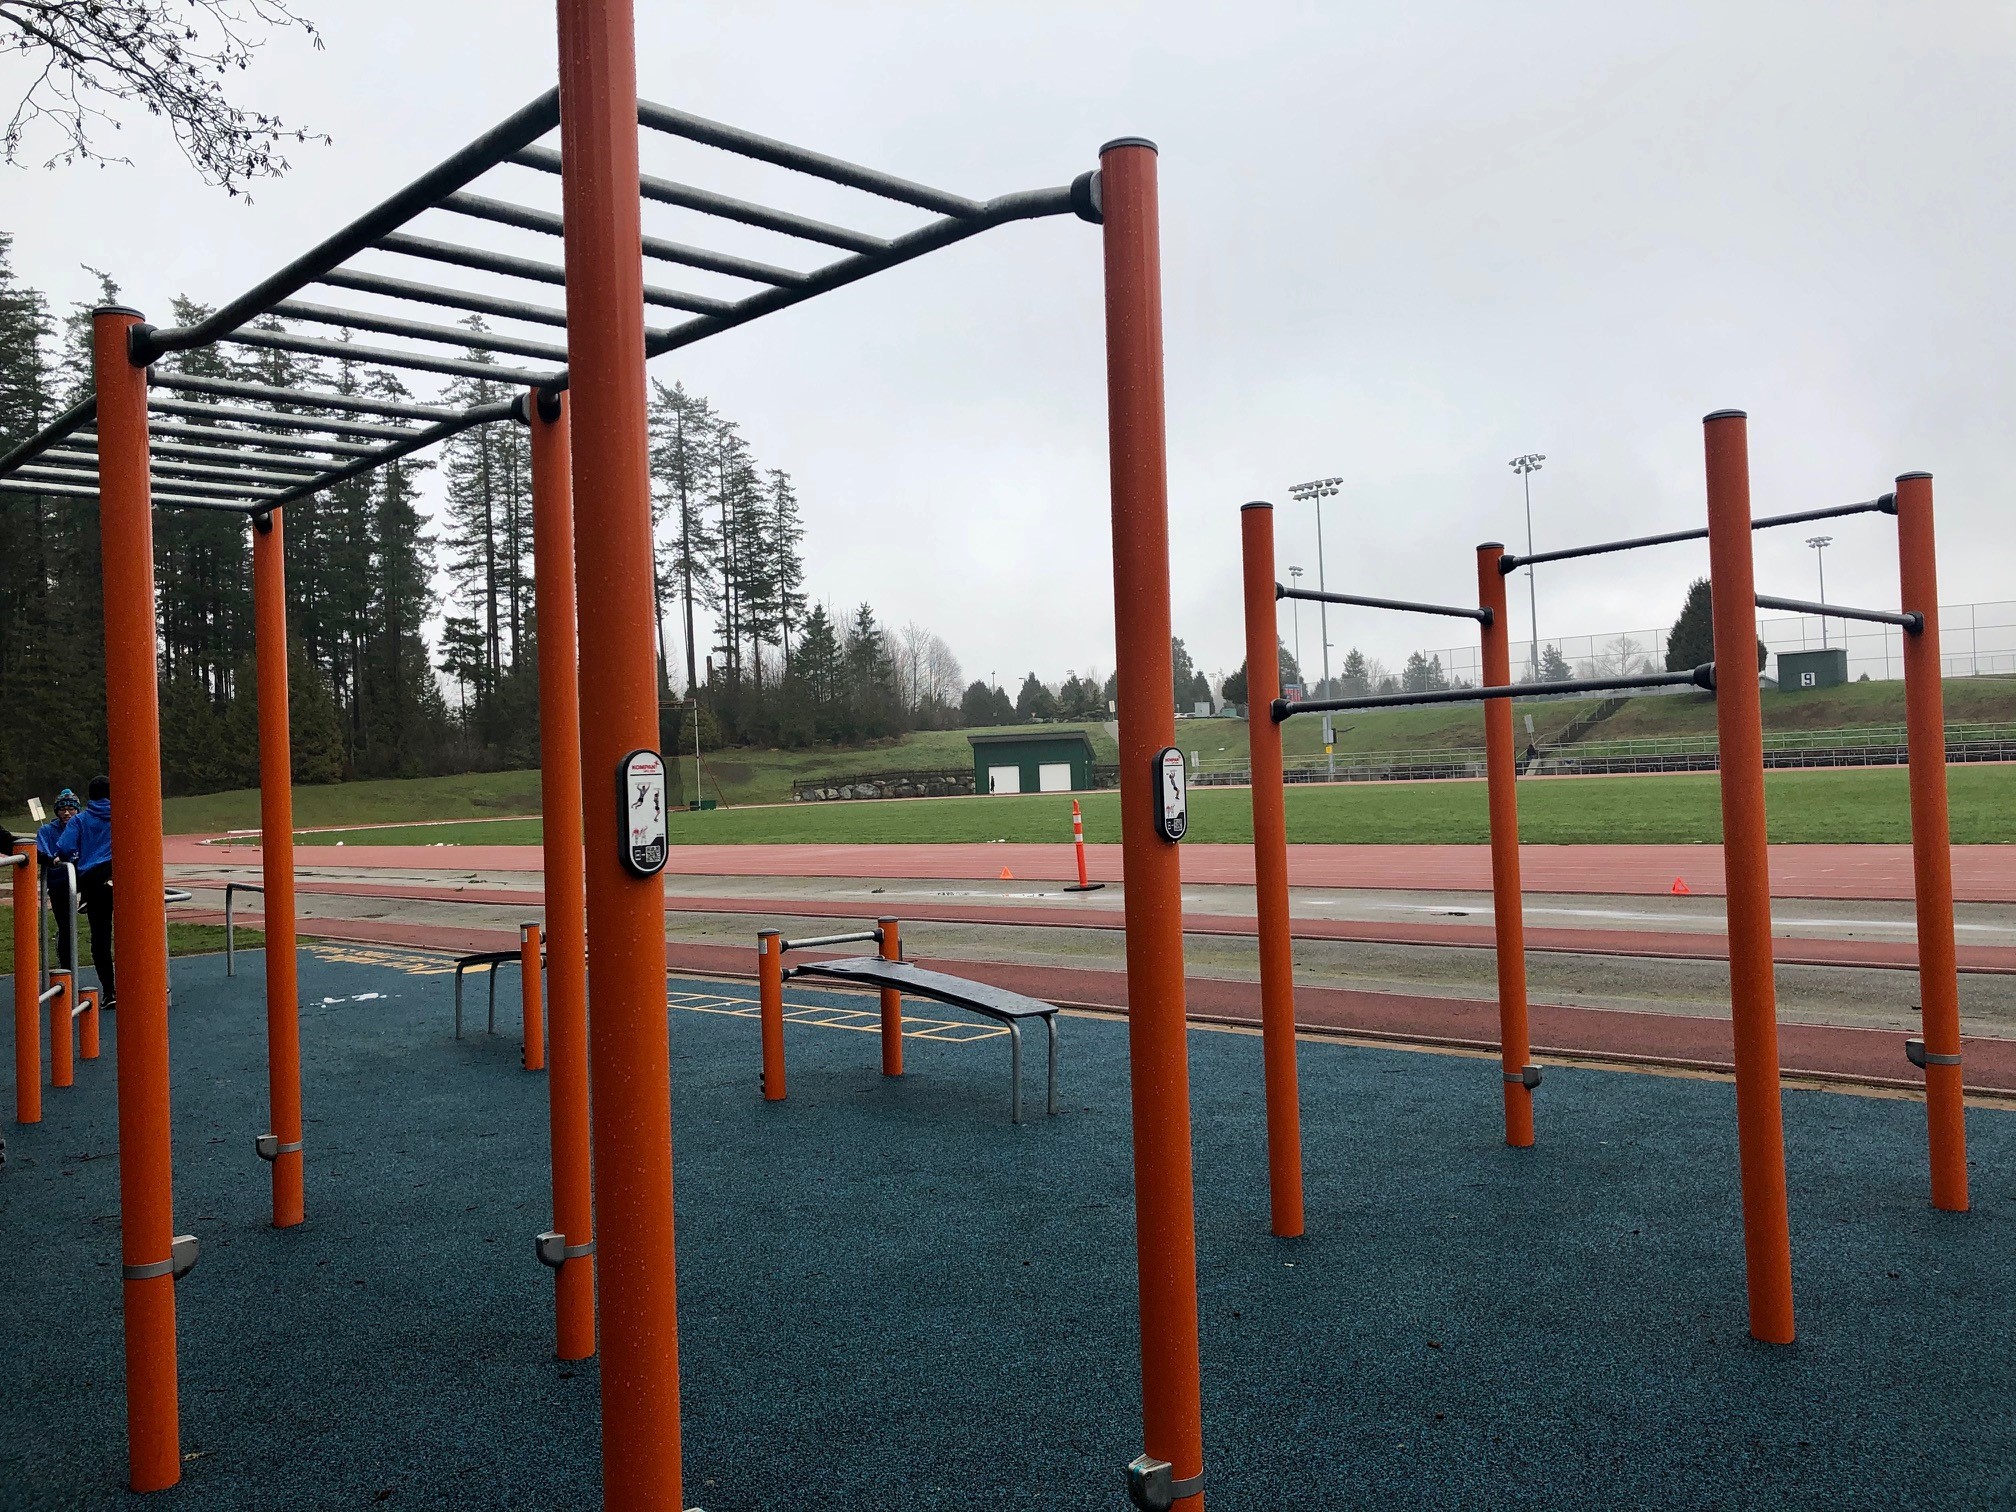 South Surrey Athletic Park installs new fitness flooring made from